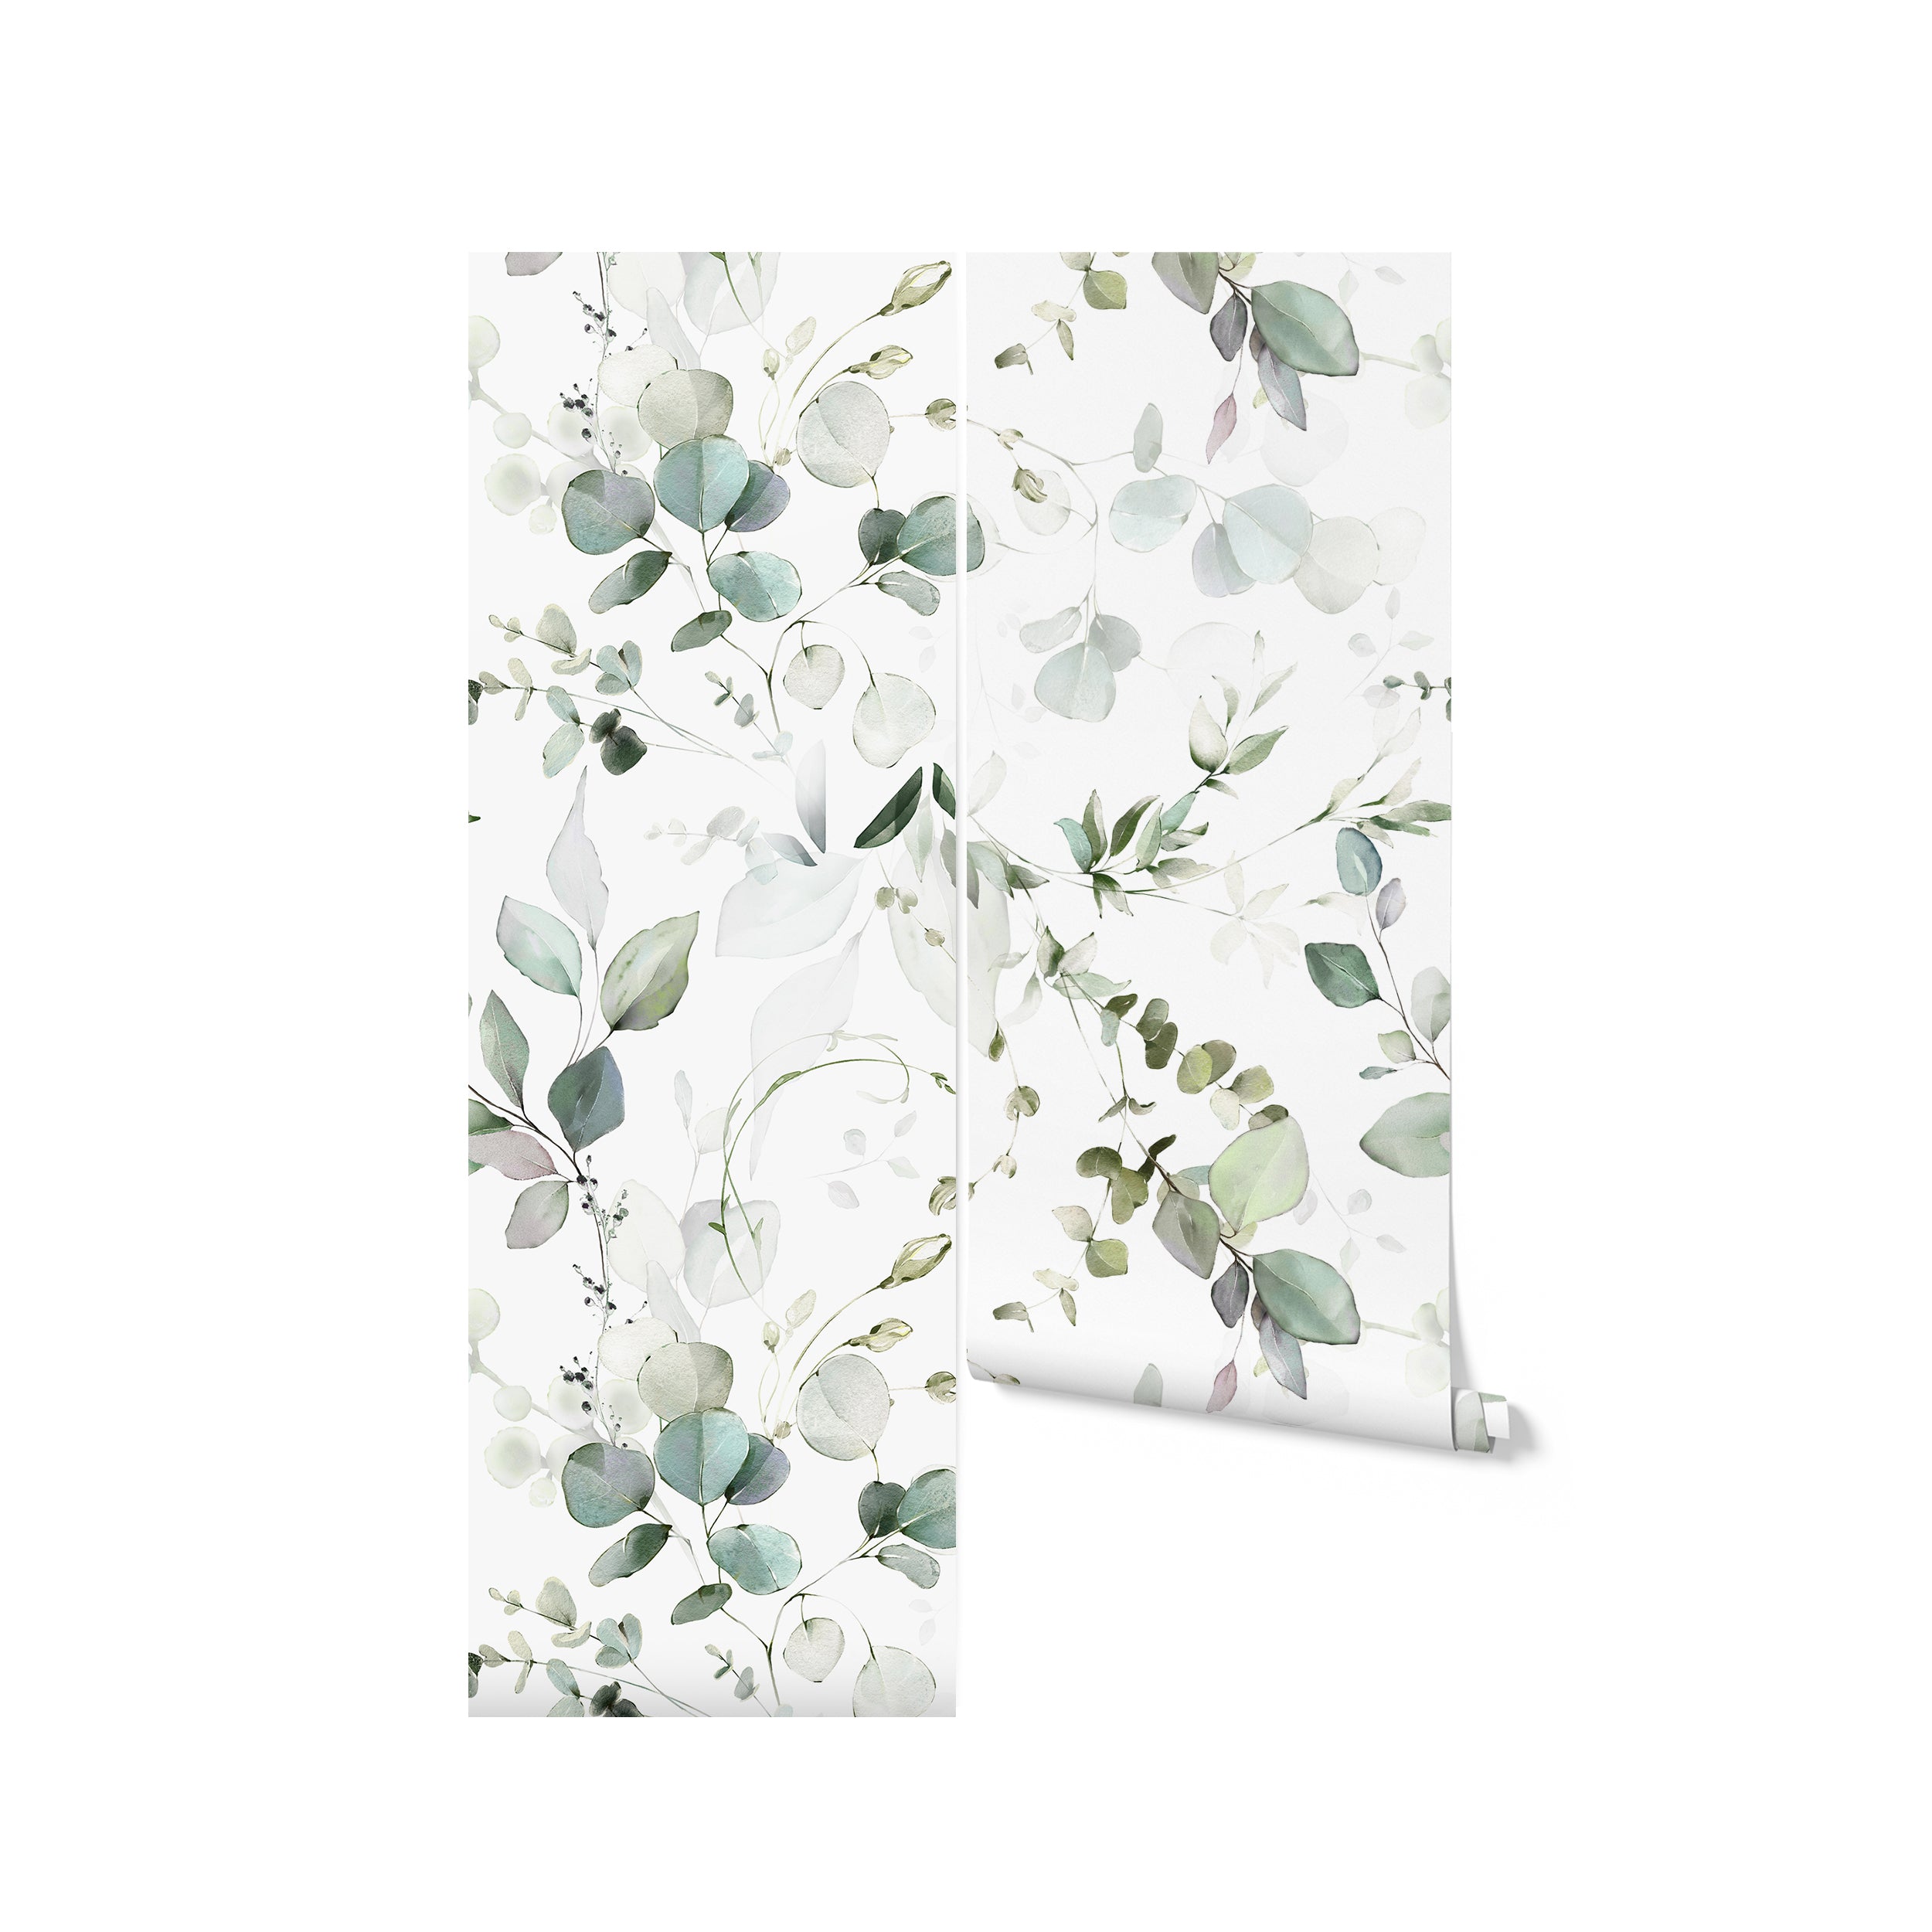 A rolled wallpaper sample illustrating the full Eucalyptus design with an assortment of eucalyptus leaves in watercolor shades of green, suggesting a tranquil and refreshing ambiance for interior decoration.